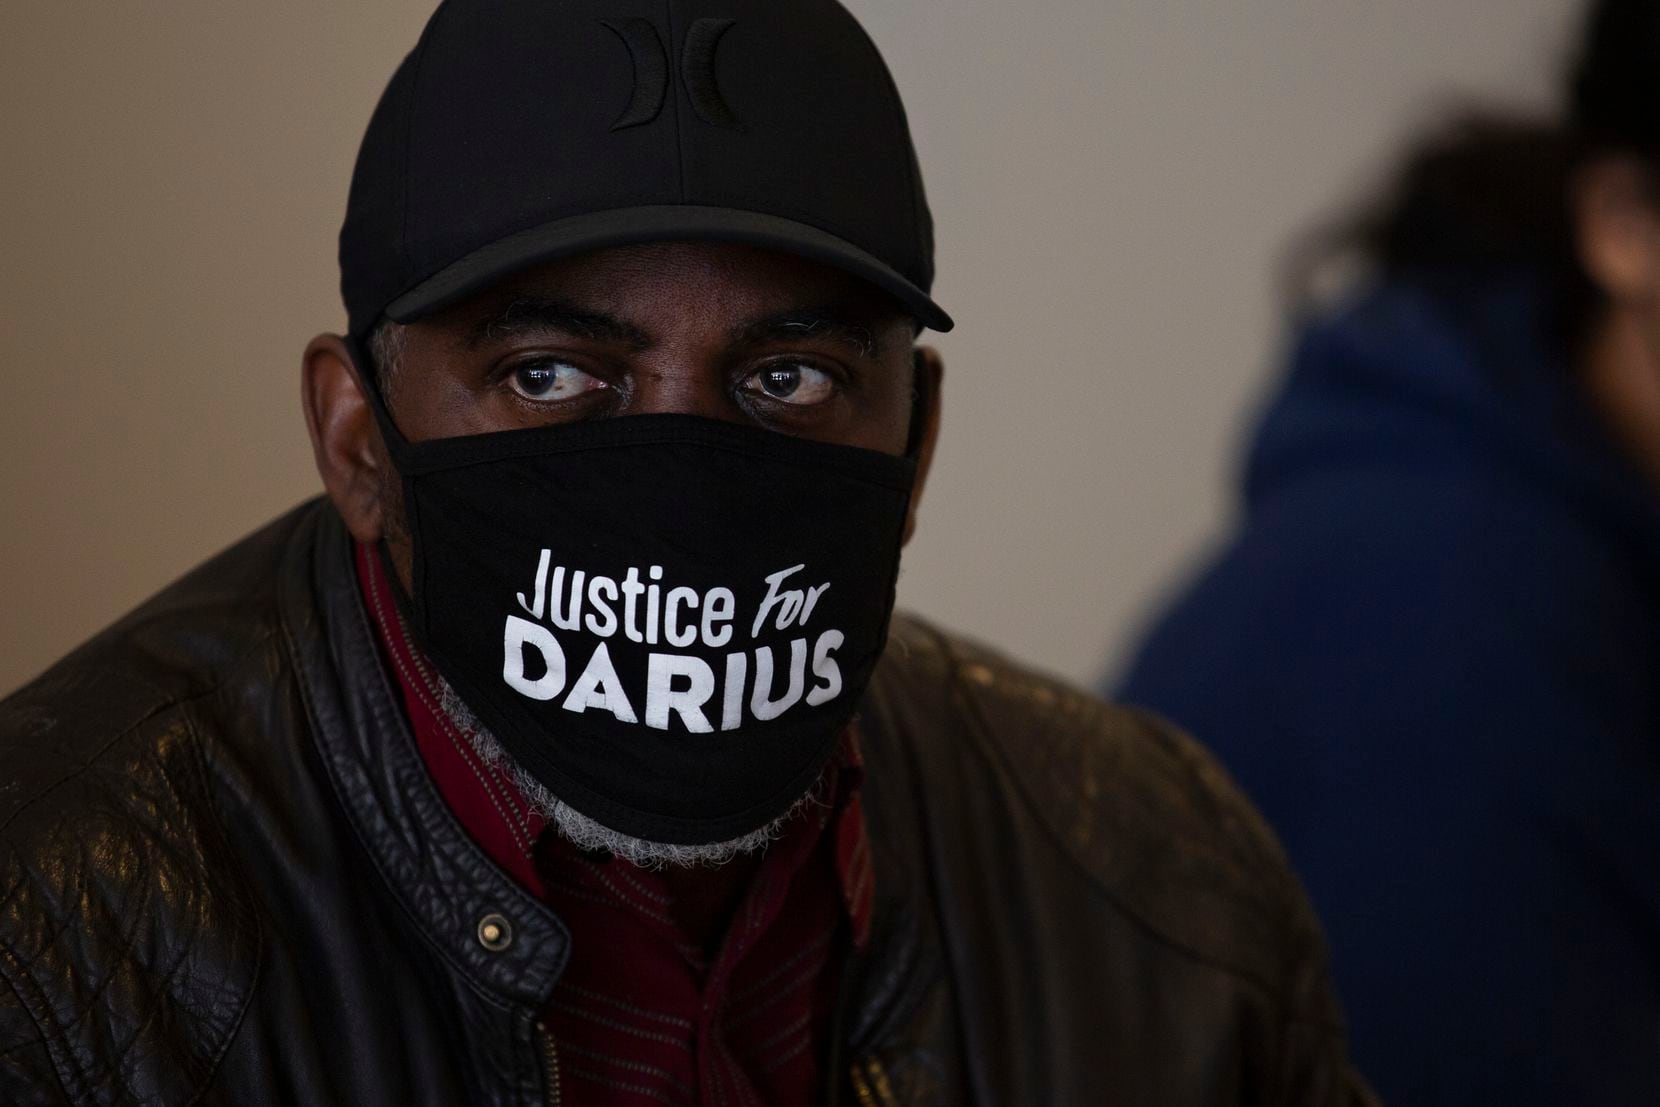 Kevin Tarver, father of Darius Tarver who was shot by police officers in Denton January 21, 2020, listens to attorney Lee Merritt speak at the Collin County SheriffÕs Office in McKinney, TX on Friday, March 19, 2021. Family and friends of Marvin Scott III, who died in while in custody on Sunday, March 14, 2020 were not allowed into the press conference over the incident held by Collin County Sheriff Jim Skinner. (Shelby Tauber/Special Contributor)